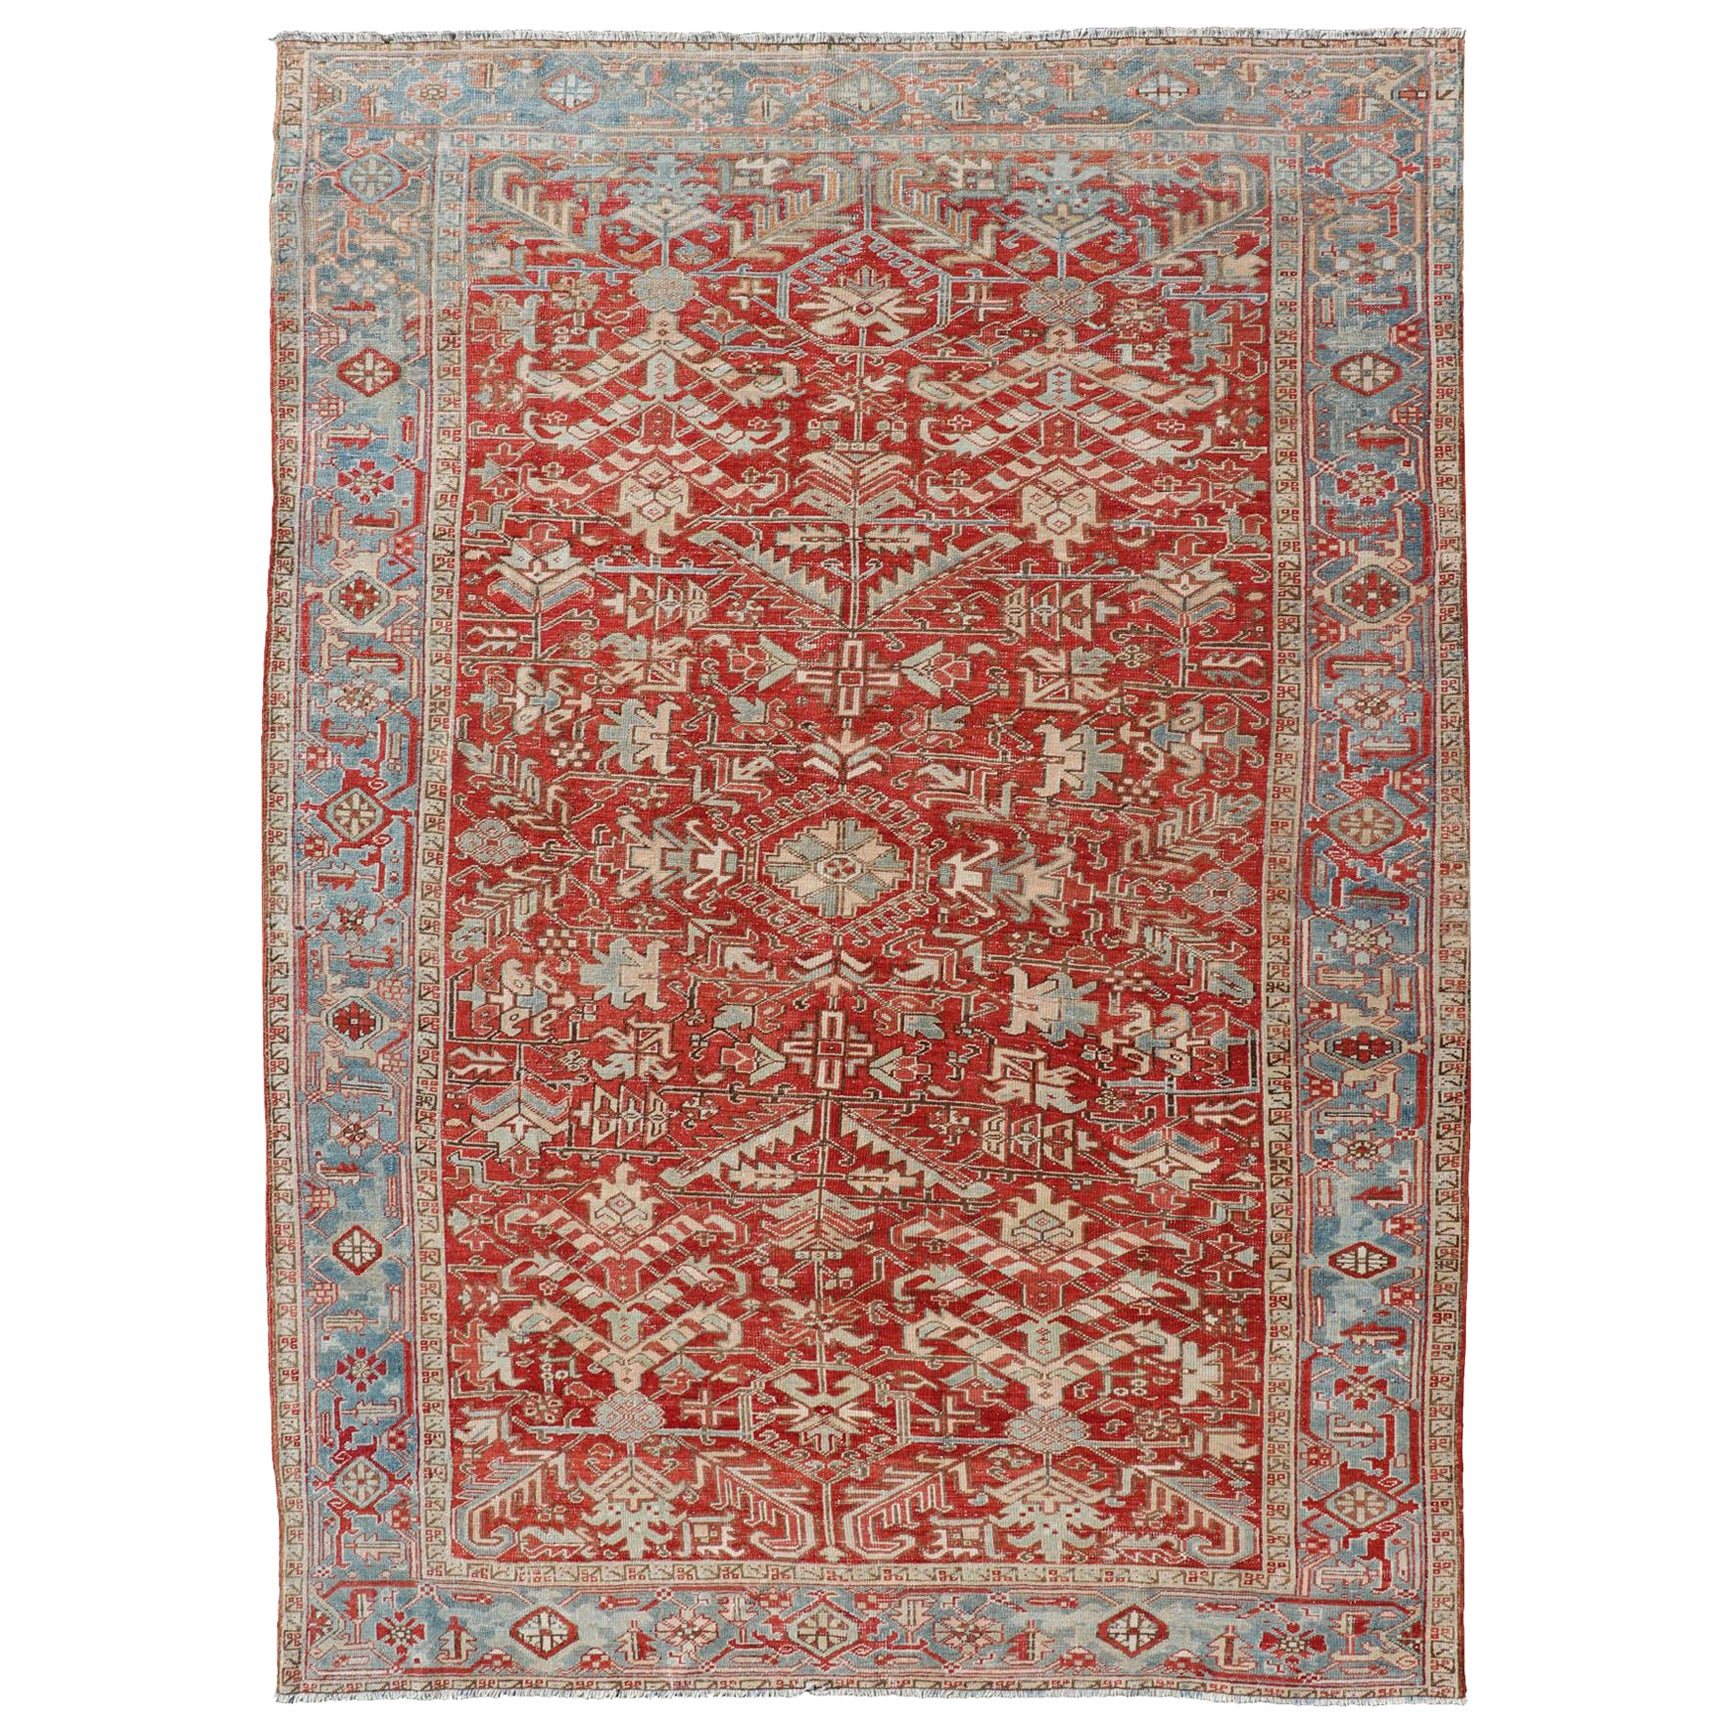 Antique Persian All-Over Heriz Rug with All-Over Geometric Design